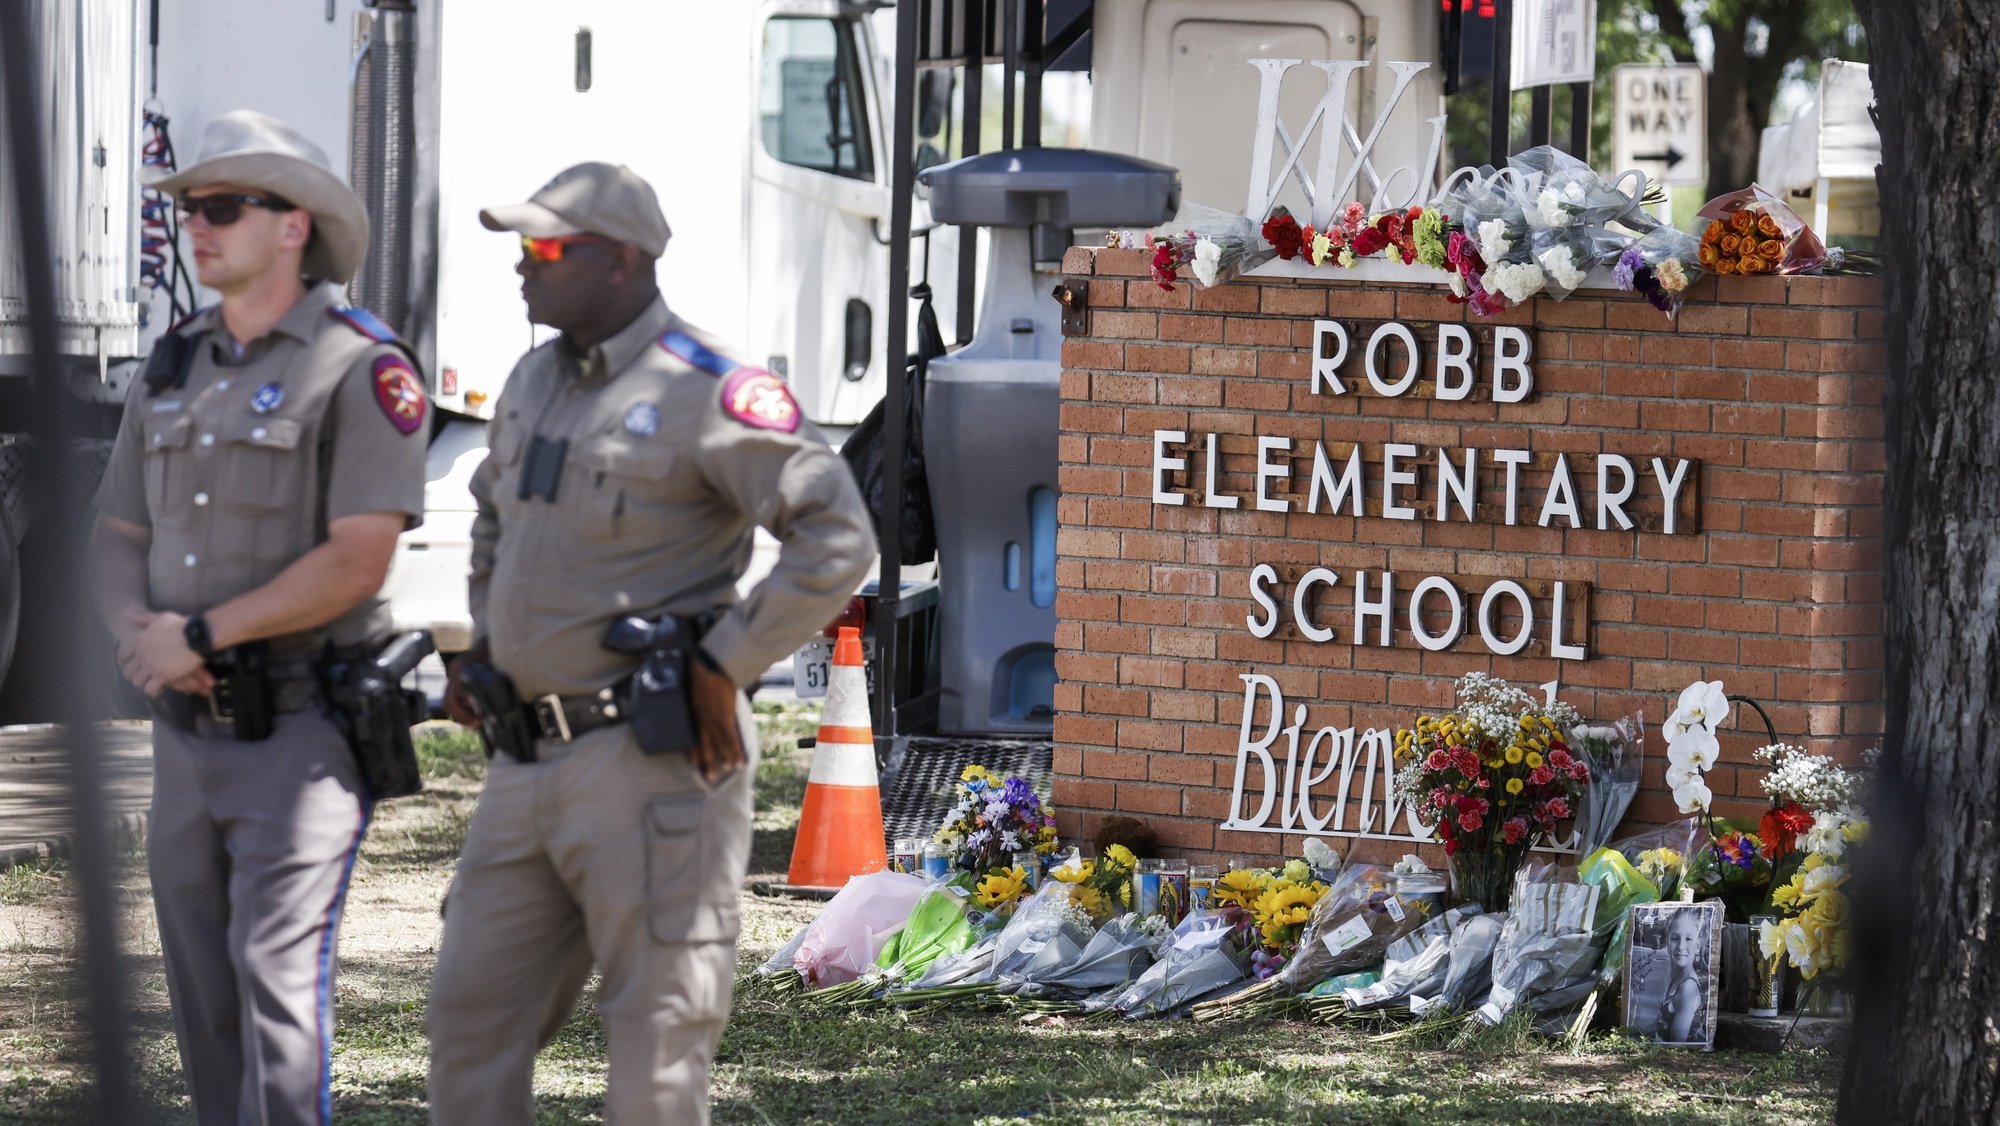 epa09976024 Texas Highway Patrol officers stand near a memorial of flowers at the scene of a mass shooting at the Robb Elementary School in Uvalde, Texas, USA, 25 May 2022. According to Texas officials, at least 19 children and two adults were killed in the shooting. The eighteen-year-old gunman was killed by responding officers.  EPA/TANNEN MAURY